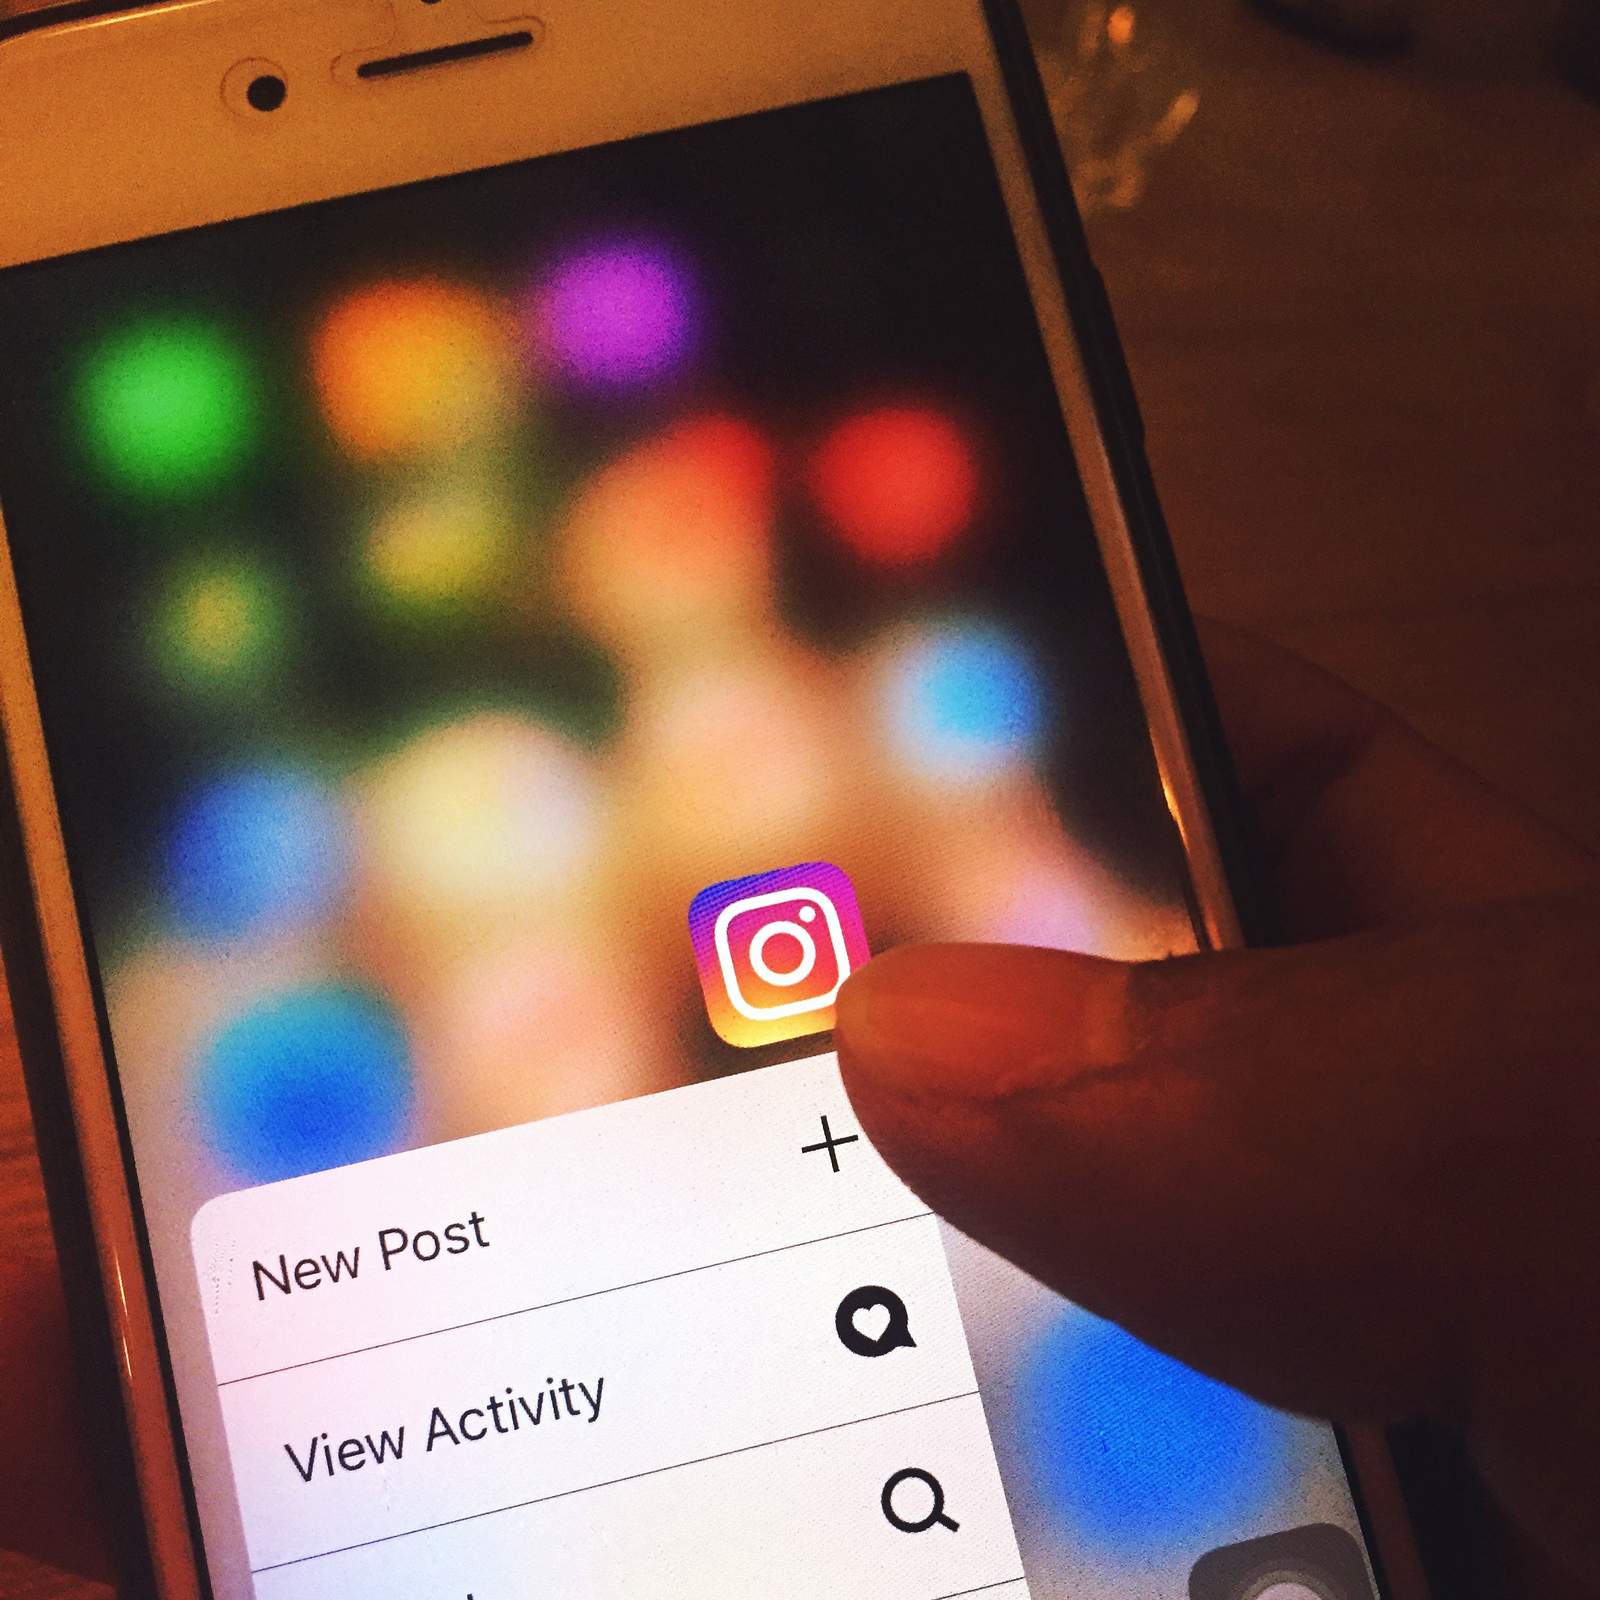 Instagram launches hidden feature for users to customize app icon. Here’s how to do it.